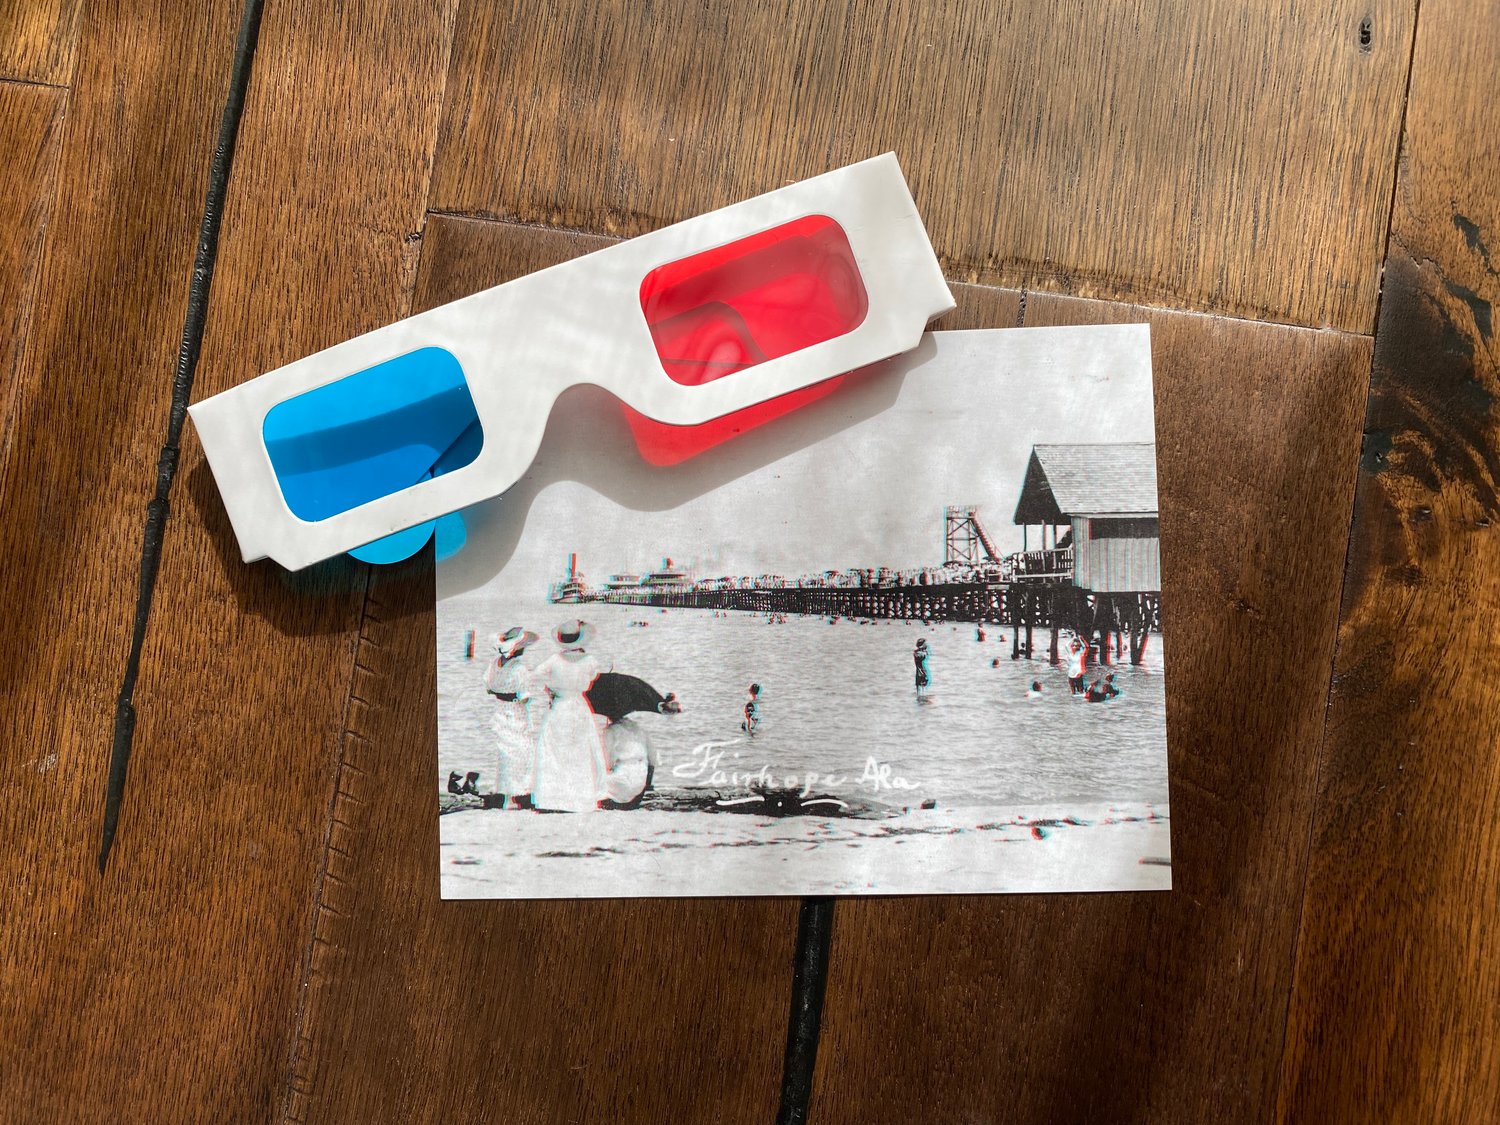 After visiting the "Visions of a Fairhope" exhibit keep your 3D glasses and grab a free postcard to share the experience with a friend.